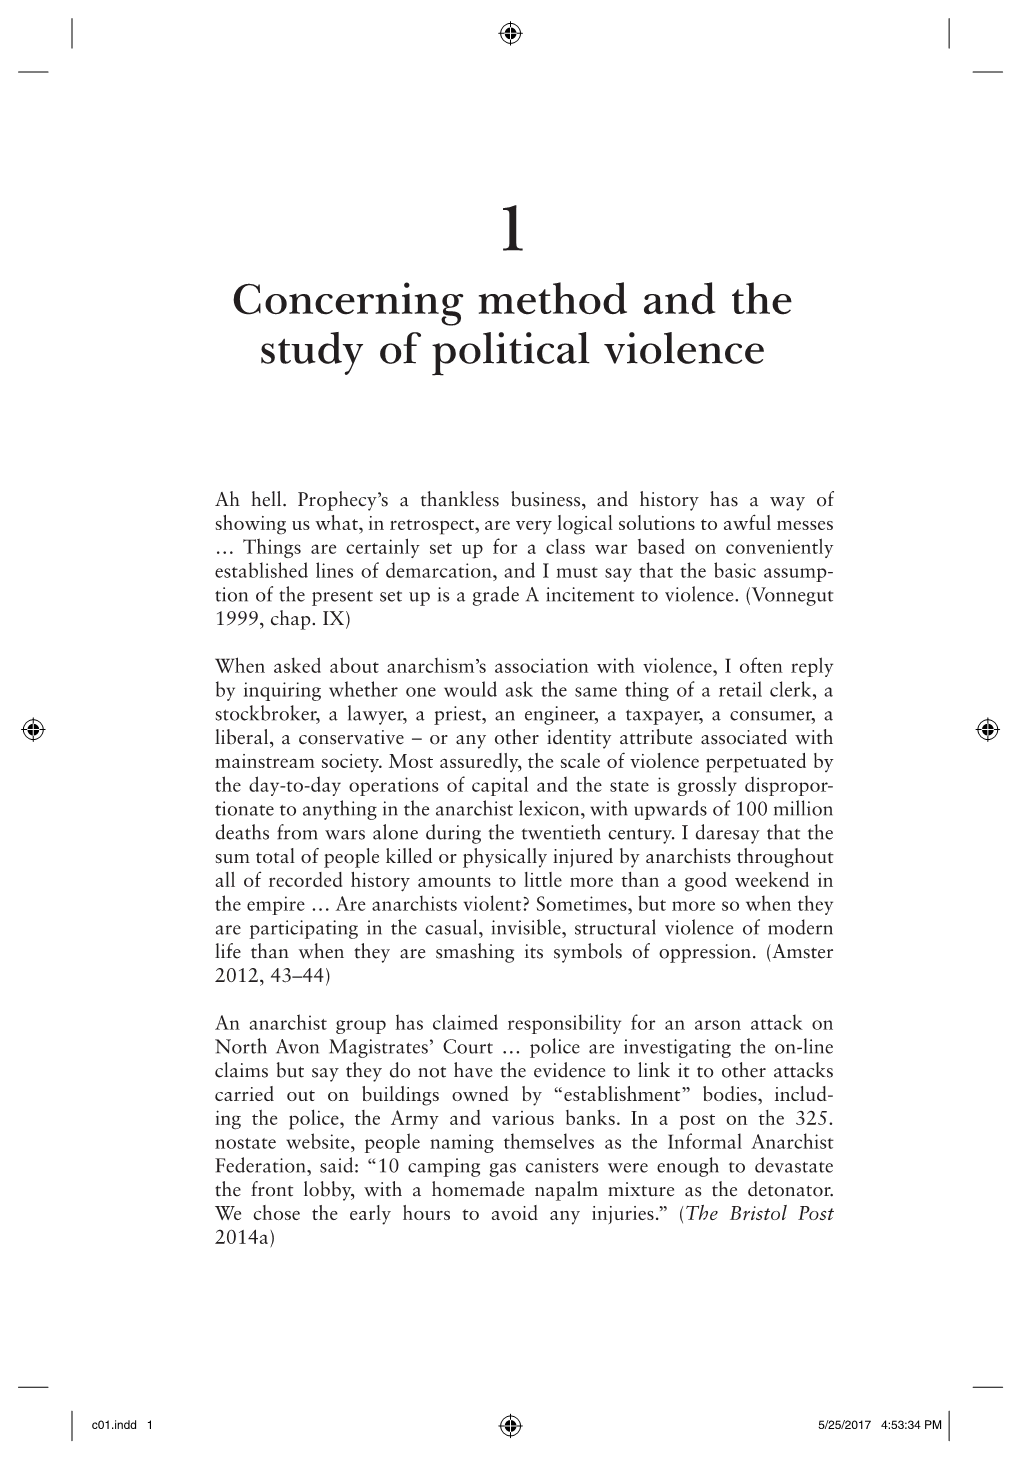 Concerning Method and the Study of Political Violence